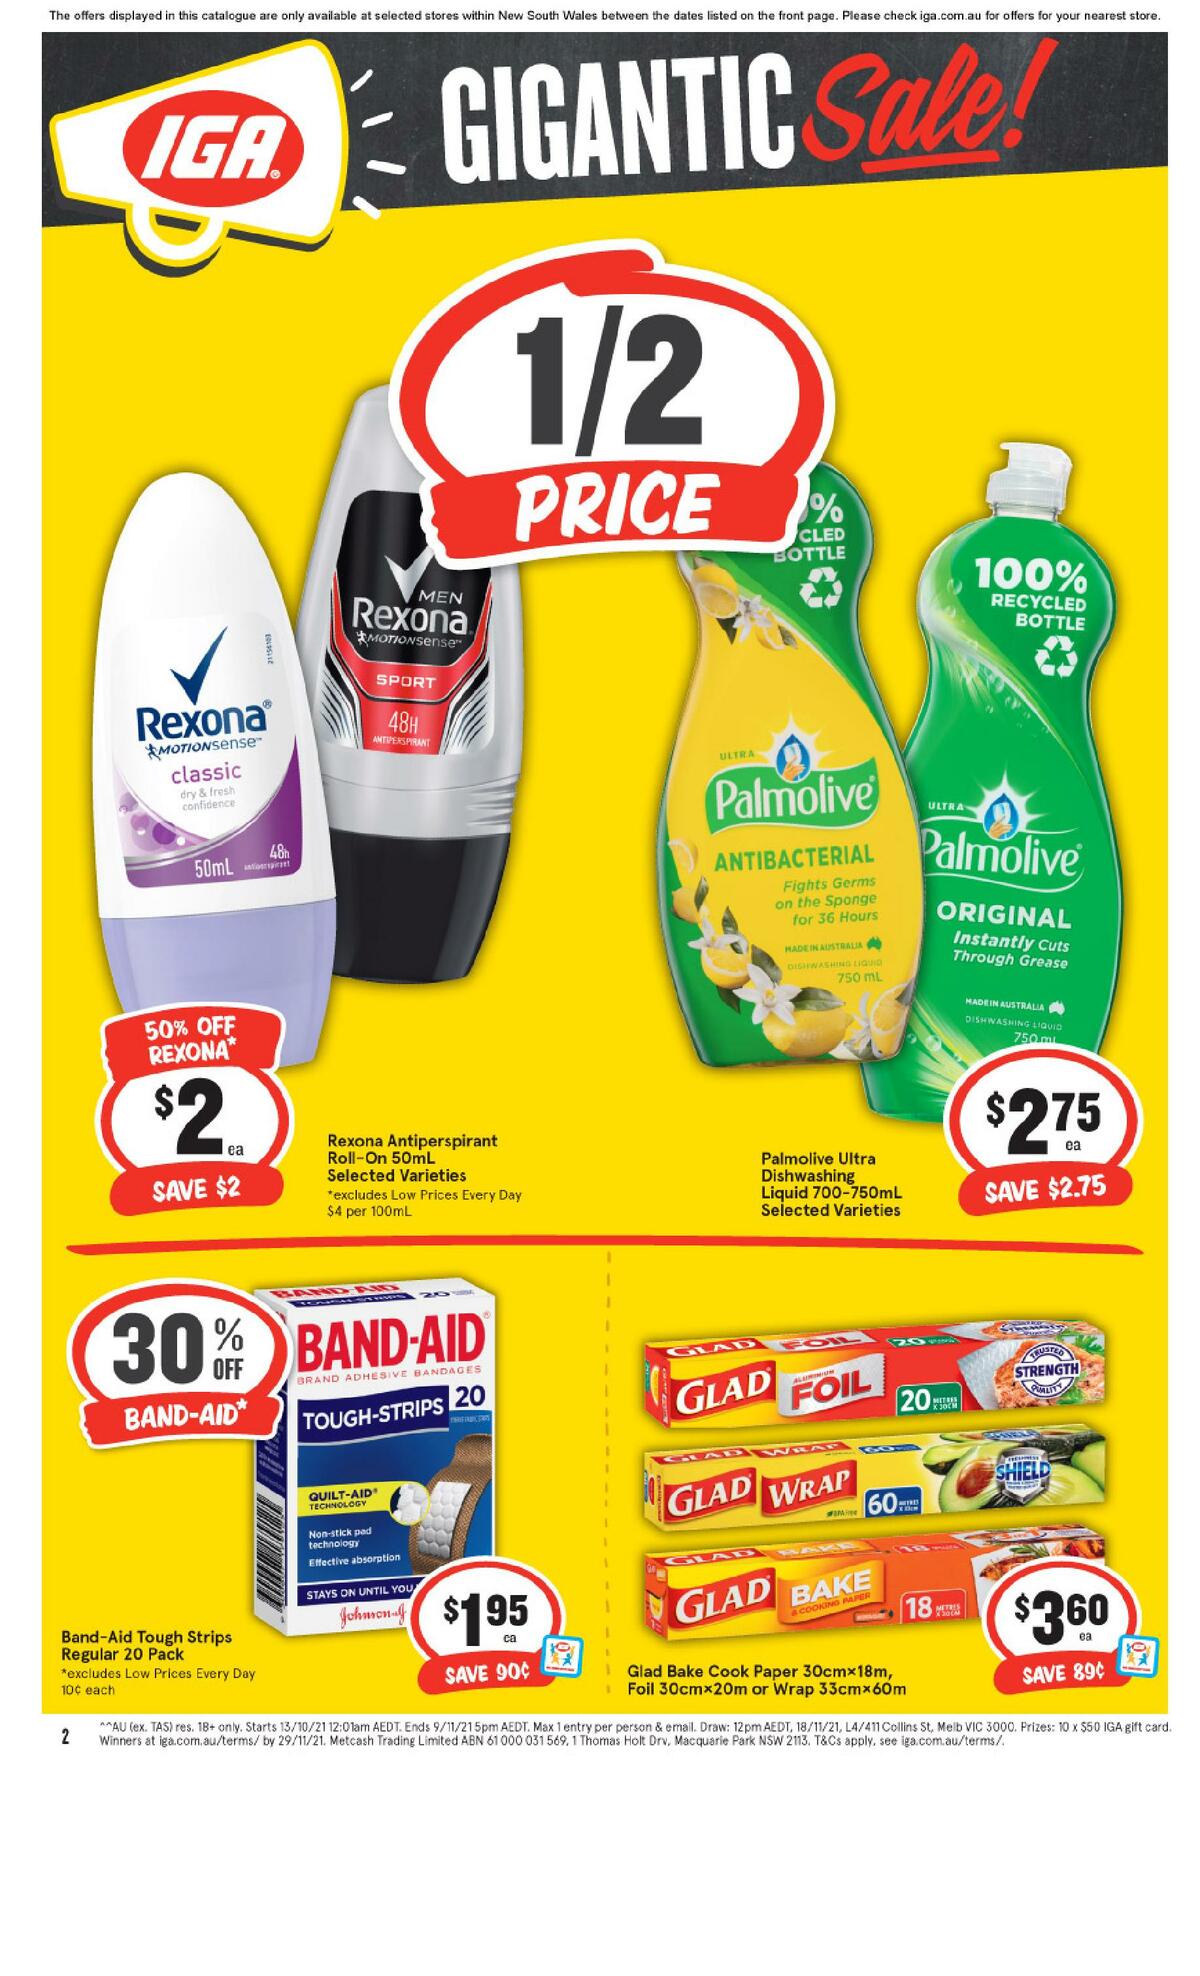 IGA Catalogues from 13 October